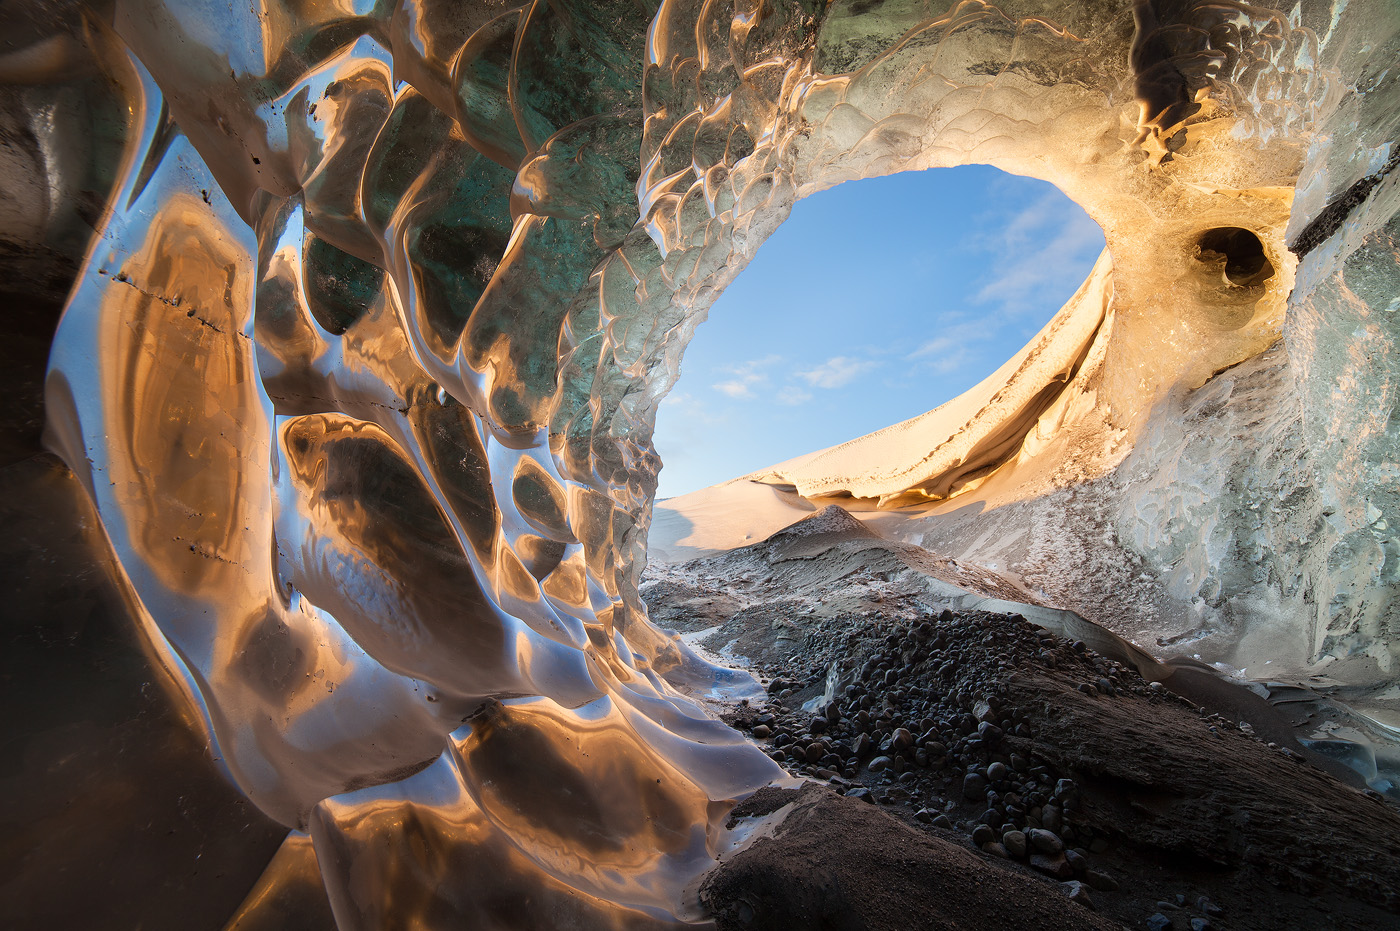 This long-gone ice cave in Iceland has been one of my most successful shots ever since it was taken in December 2011. The cave melted and collapsed soon after I took the shot.<br>Canon EOS 5D Mark IV, Samyang 14mm f/2.8, 1/25 sec, f/14, ISO 100 <br>Breiðamerkurjökull, Iceland